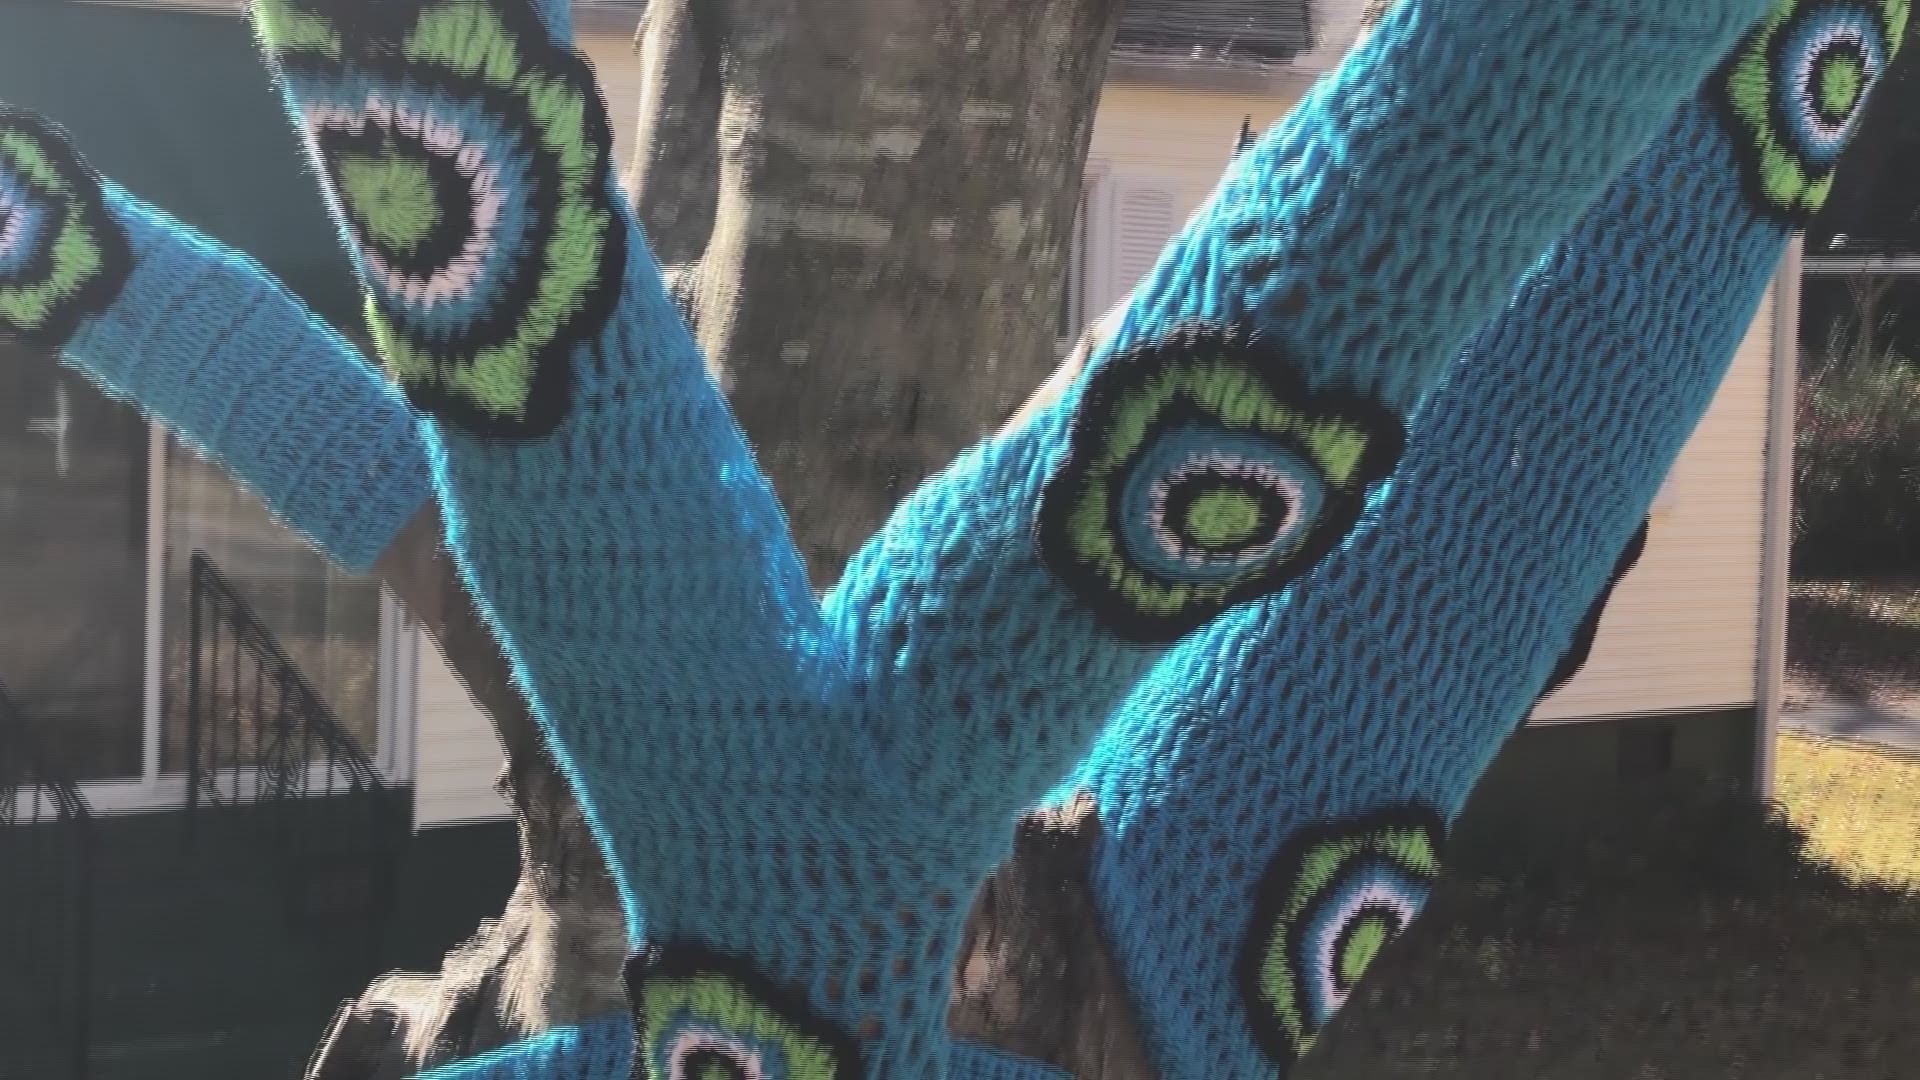 Local East Point resident turns knitting pastime into works of art